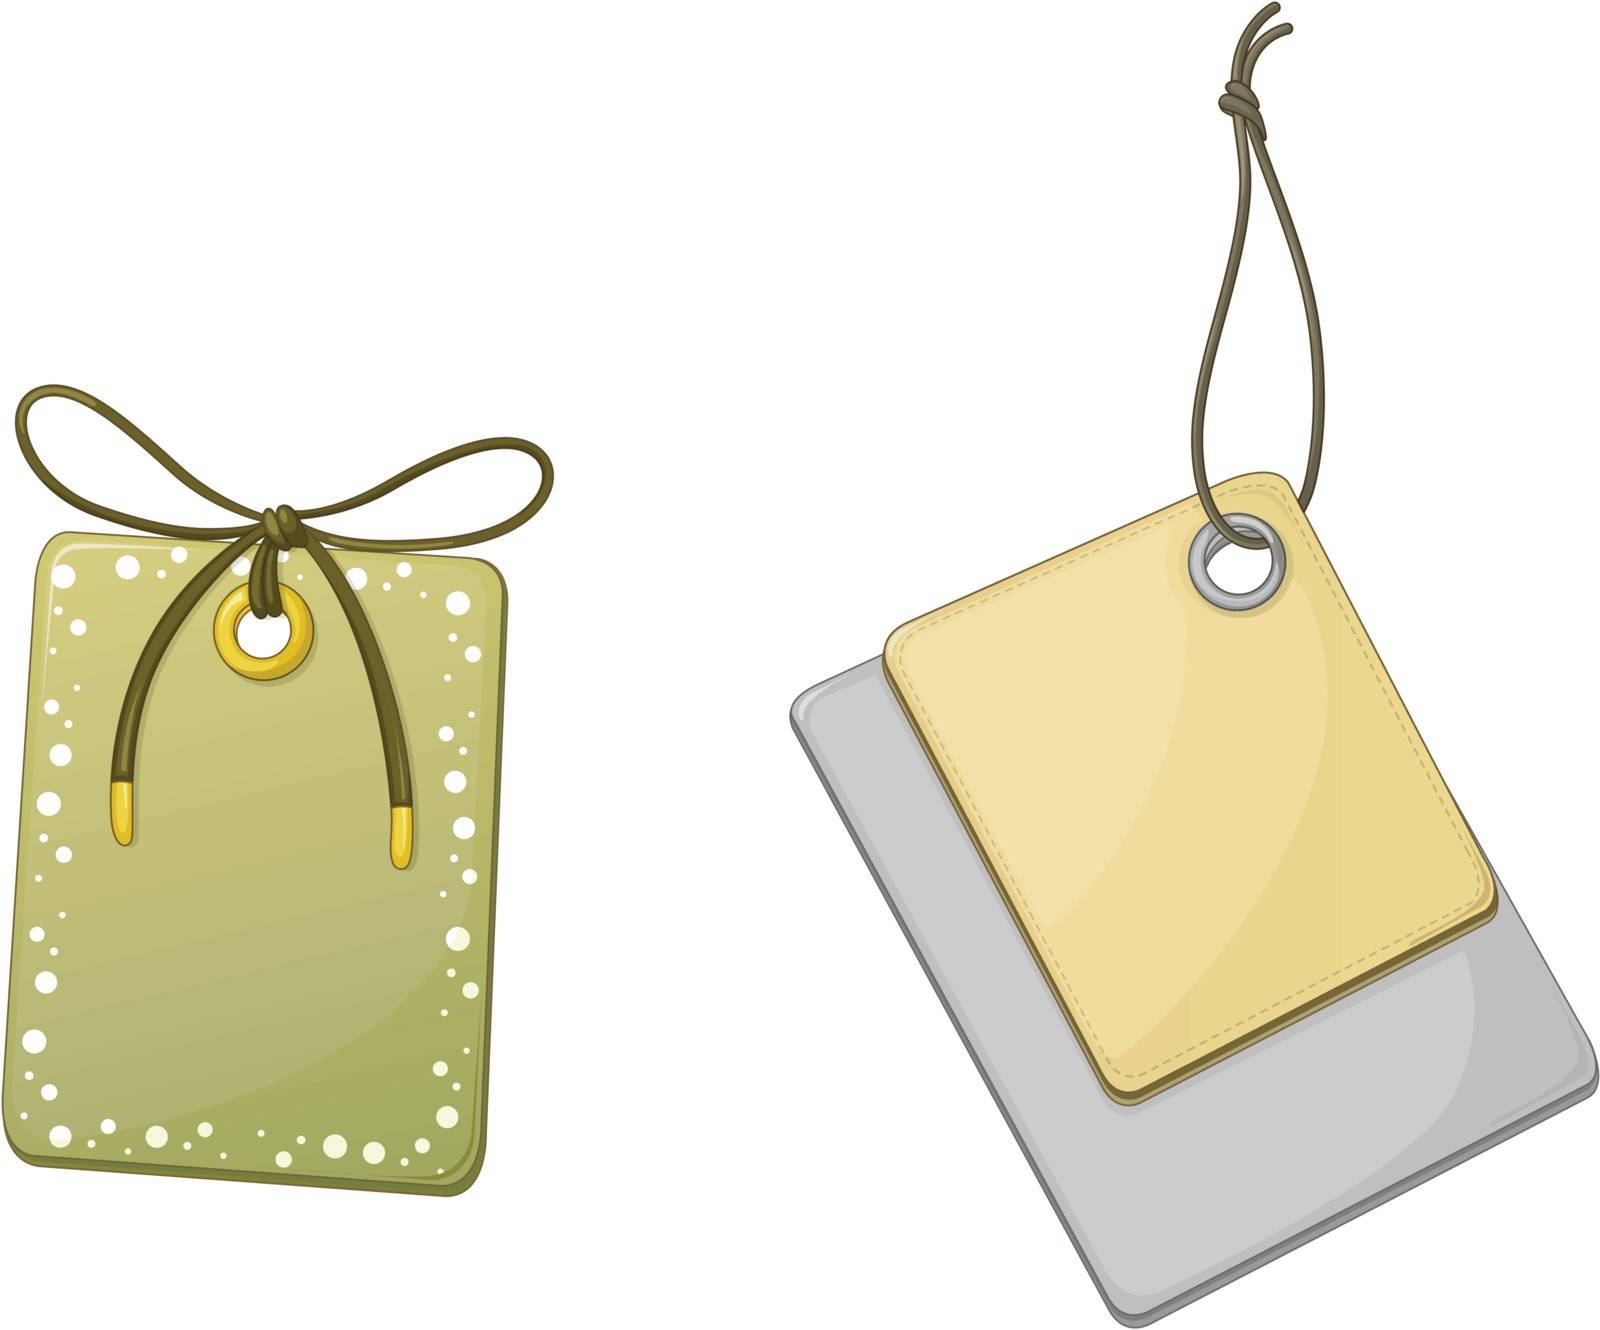 Illustration of price tags on white